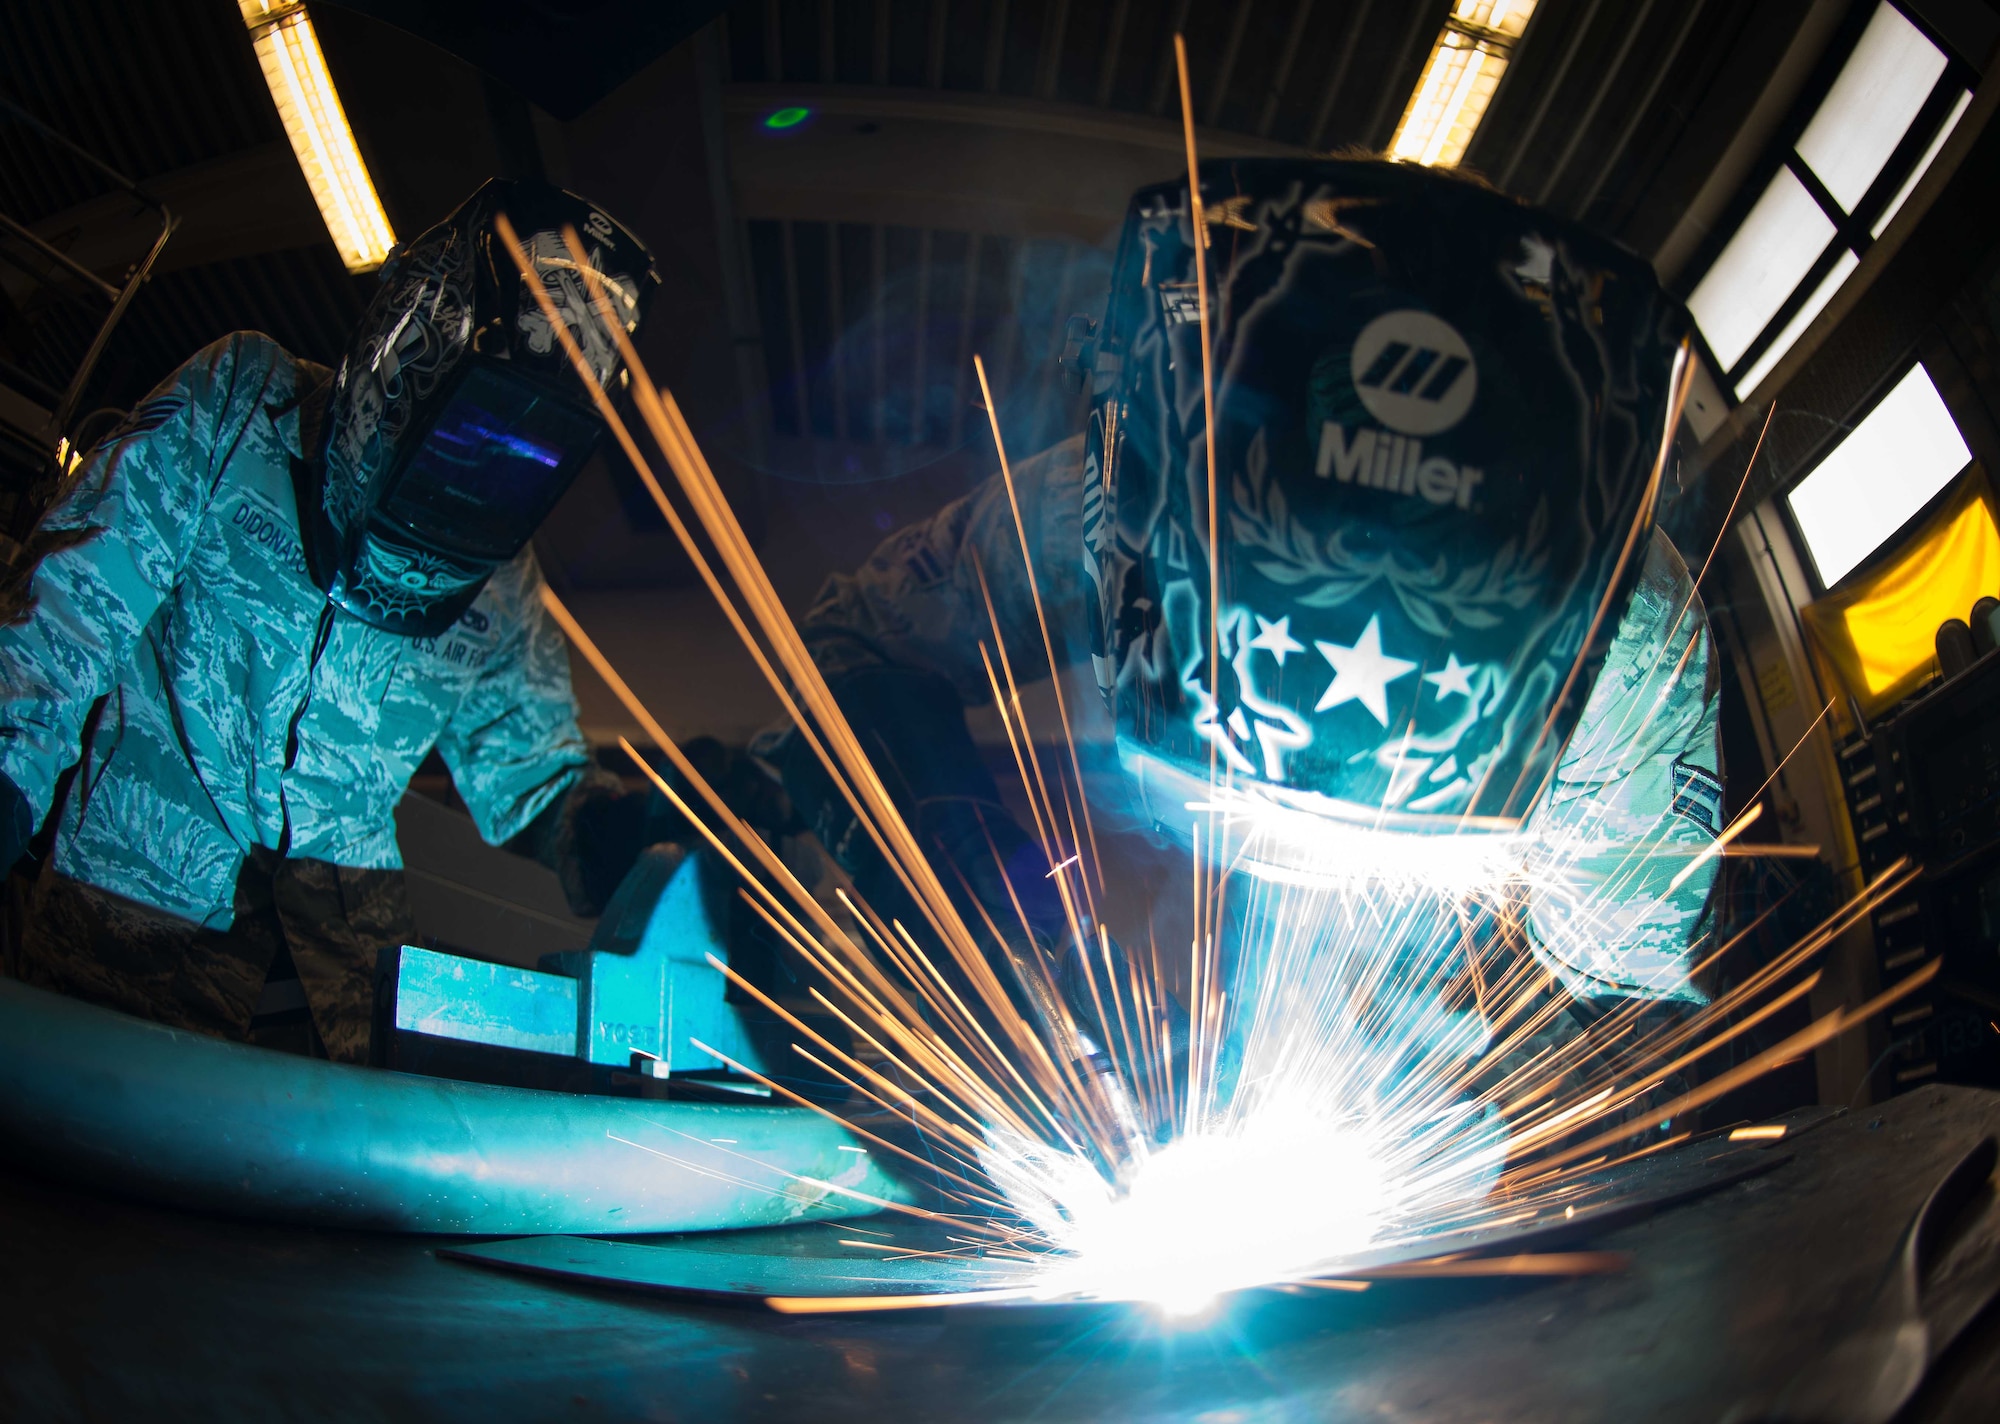 Airman 1st Class Joshua Roth, left, 86th Maintenance Squadron aircraft metals technology technician, uses a metal insert gas welder while Staff Sgt. Brandon Didonato, 86th MXS aircraft metals technology technician, observes on Ramstein Air Base, May 2, 2017. The aircraft metals technology shop uses a MIG welder to create sturdy aircraft parts on demand, allowing aircraft repair and maintenance to continue in a timely manner. (U.S. Air Force photo by Senior Airman Elizabeth Baker/Released)